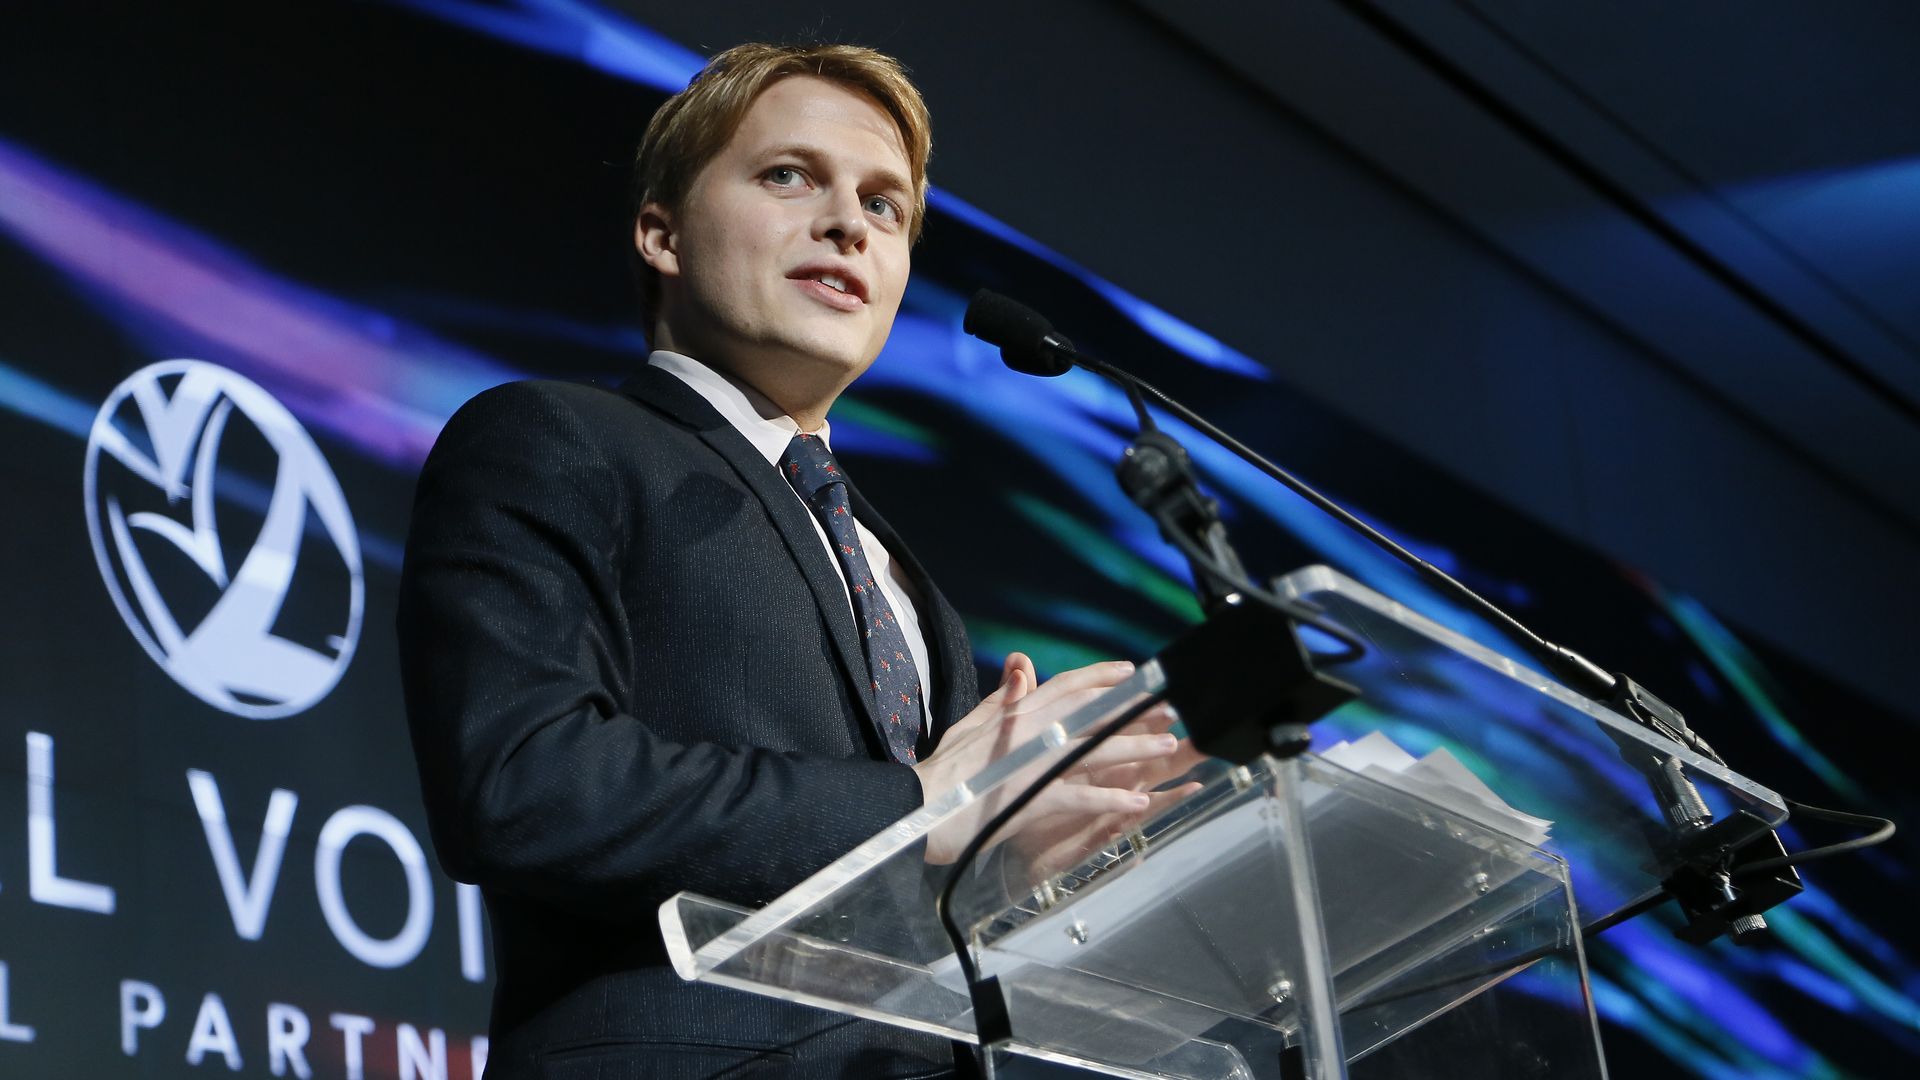 Ronan Farrow speaks on stage during Vital Voices Global Partnership: 2017 Voices Against Solidarity Awards. 